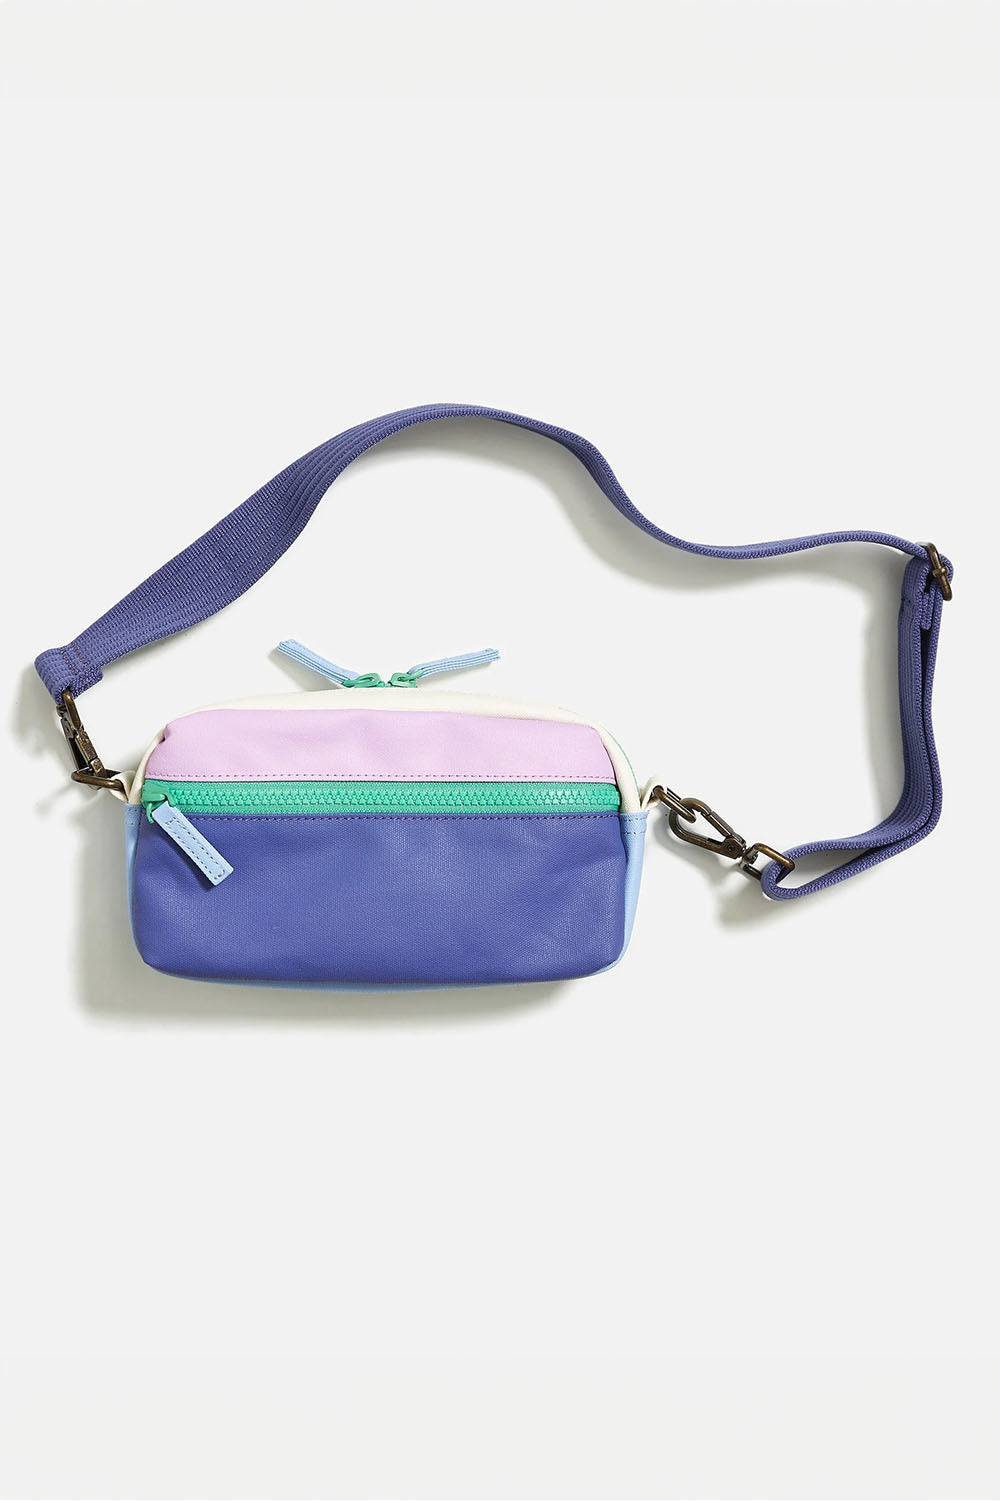 Marine Layer - Colorblock Fanny Pack - Lilac Colorblock